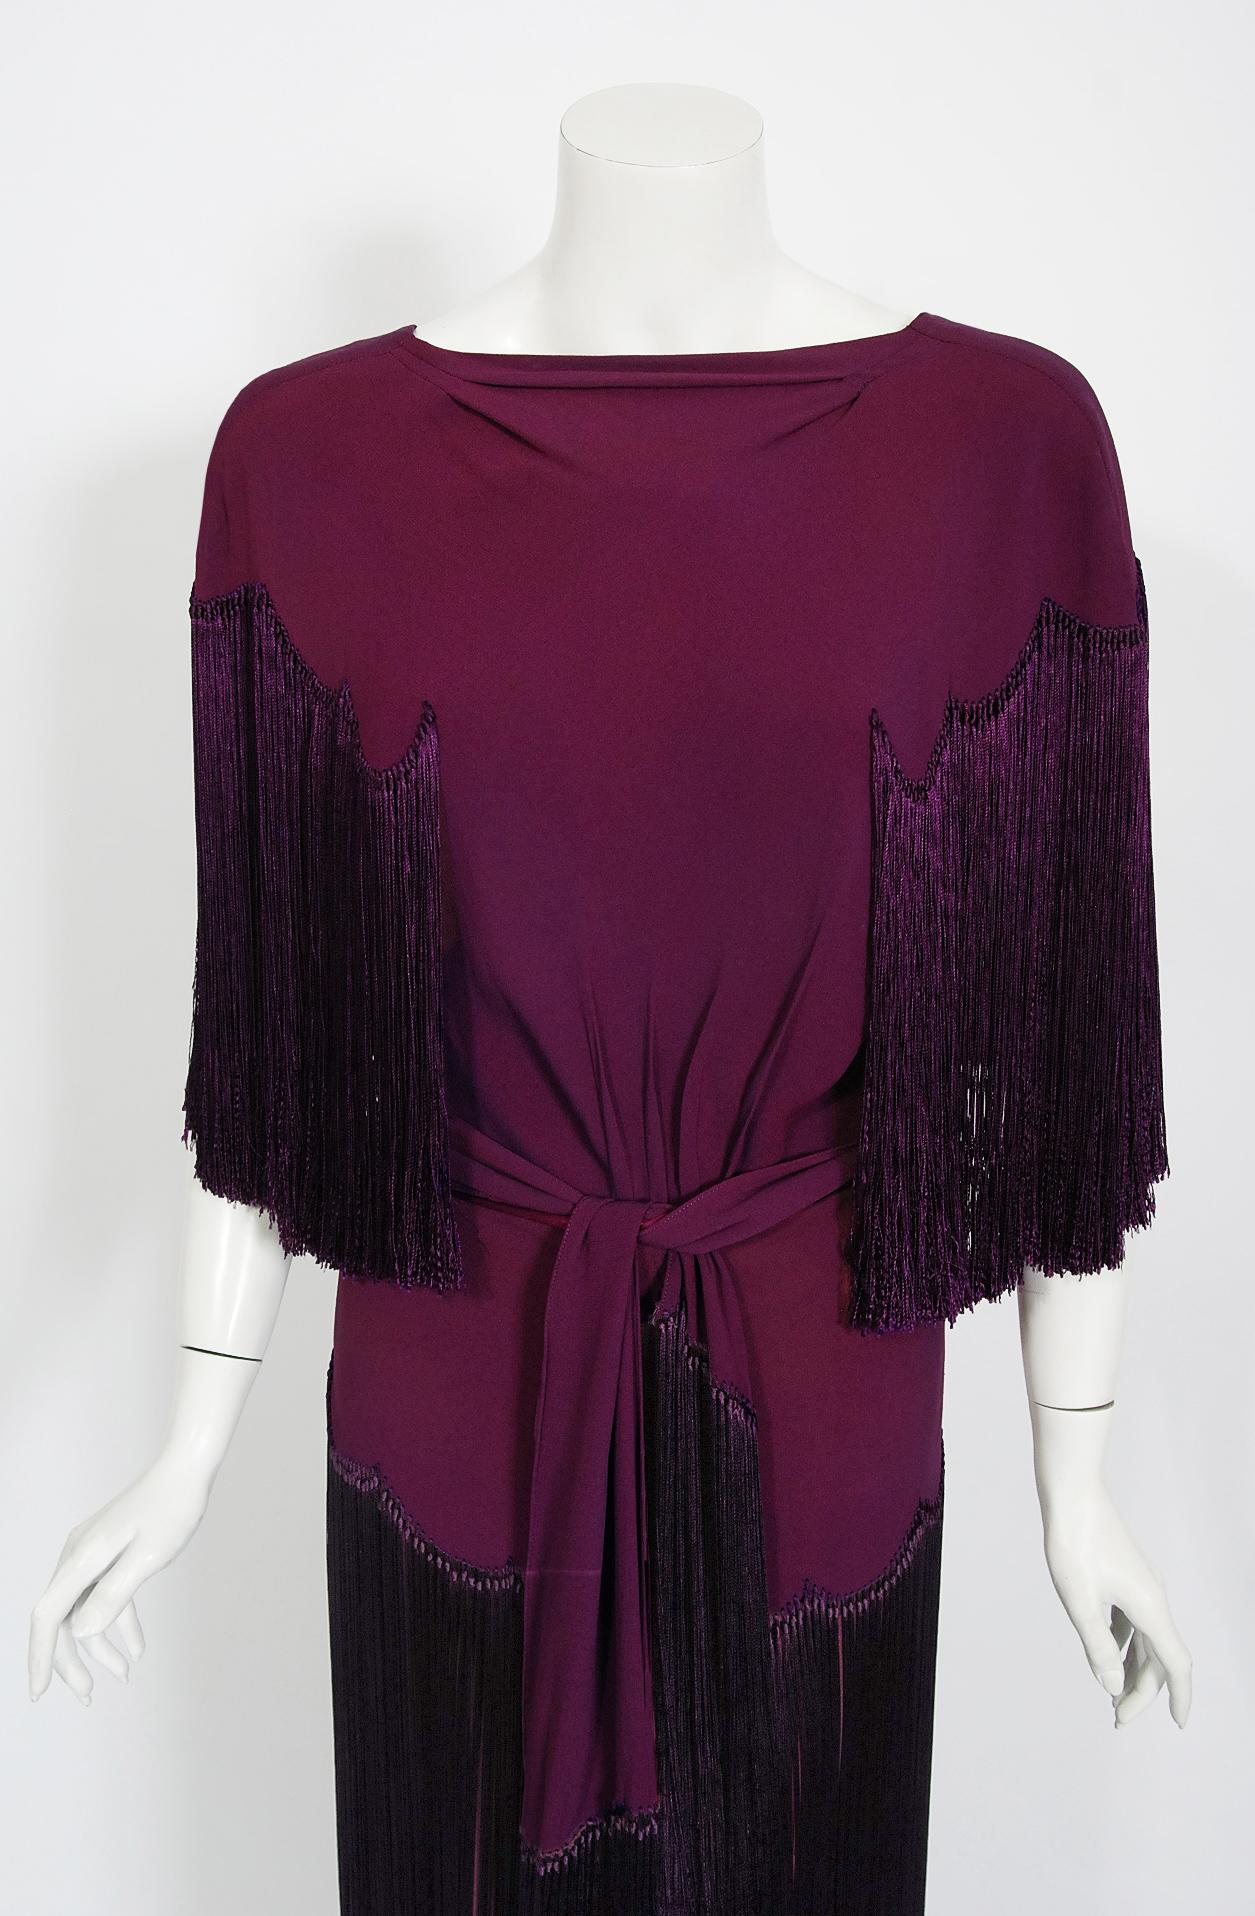 A breathtaking late 1930's custom-made plum purple silk crepe gown from the Old Hollywood era of glamour. There is so much detail, you can tell this masterpiece was created with love and care. The bodice has an alluring sculpted high neck with